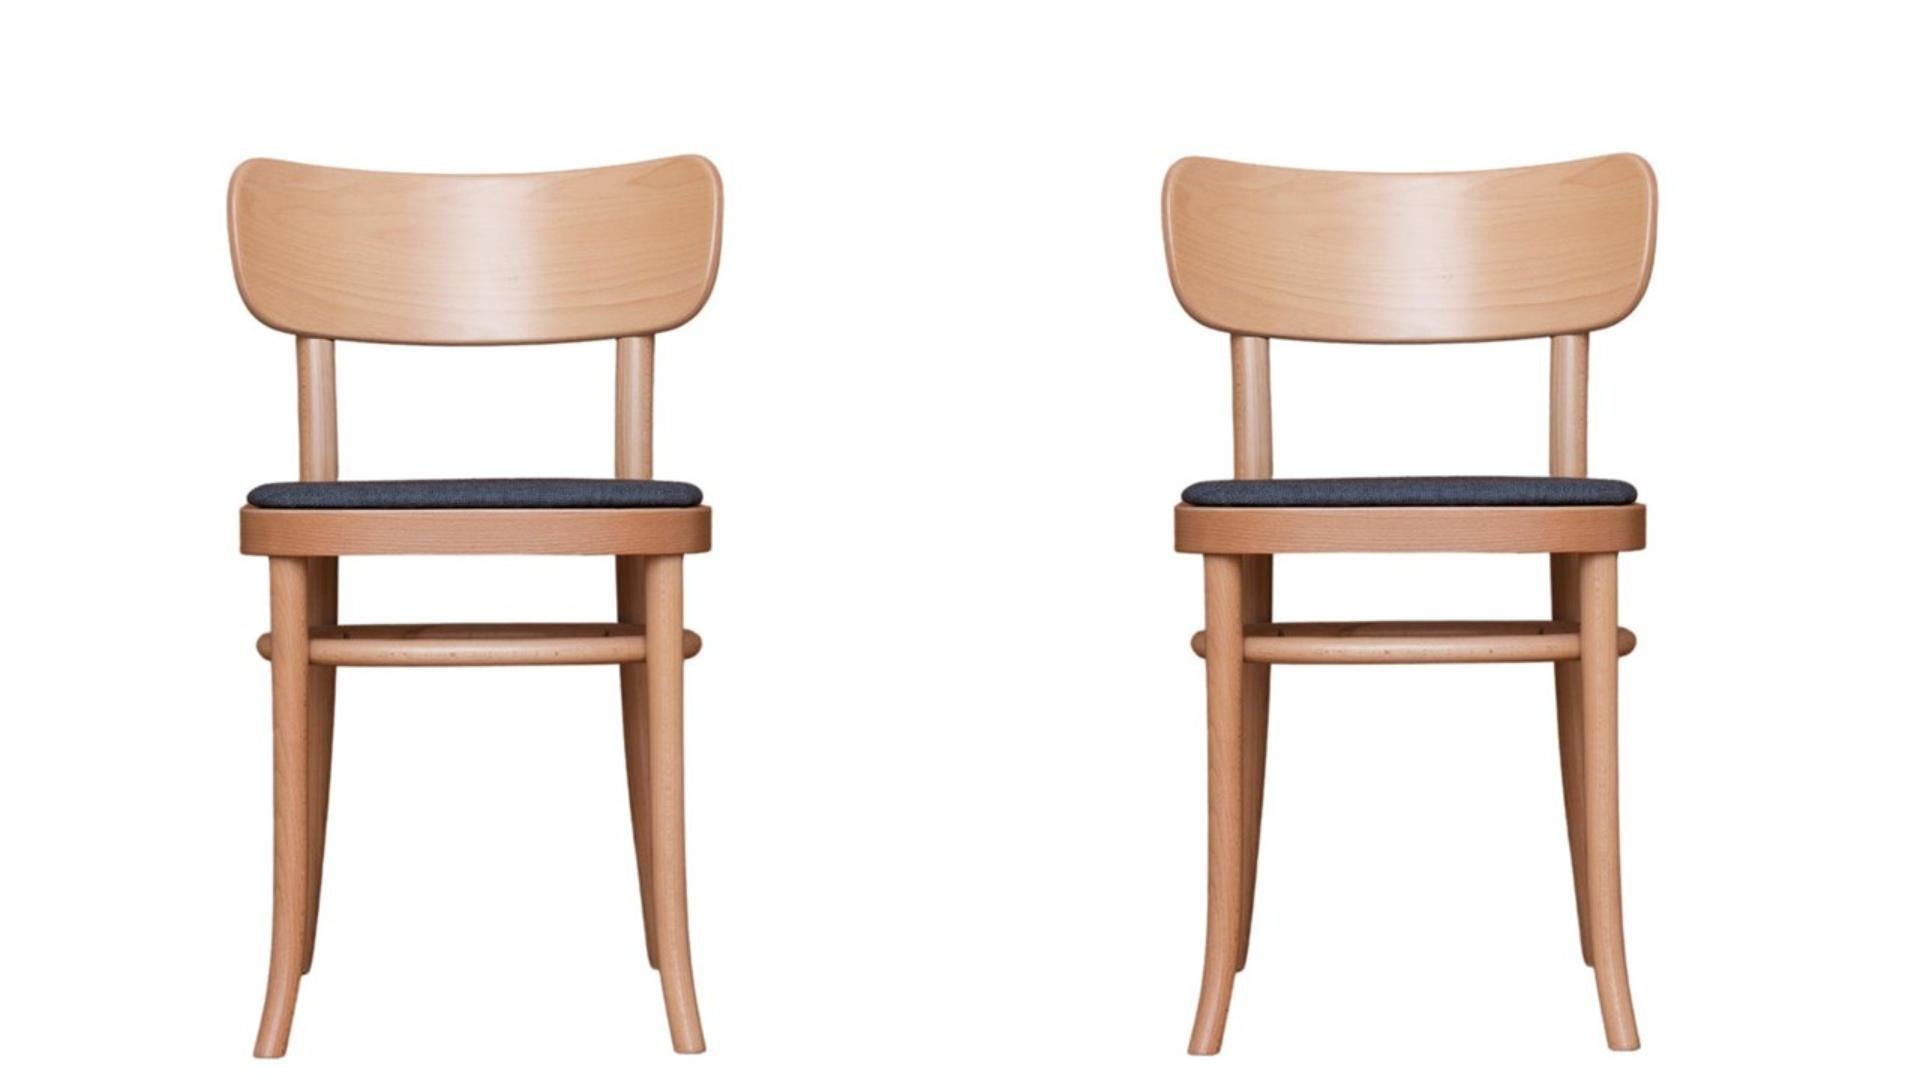 Set of 2 MZO Chairs by Mazo Design
Dimensions: W 46 x D 50 x H 75 cm
Materials: Beech.

This iconic chair played a leading role in one of the fairy tales of Danish furniture design. However – more curiously – it is also on display at The Workers